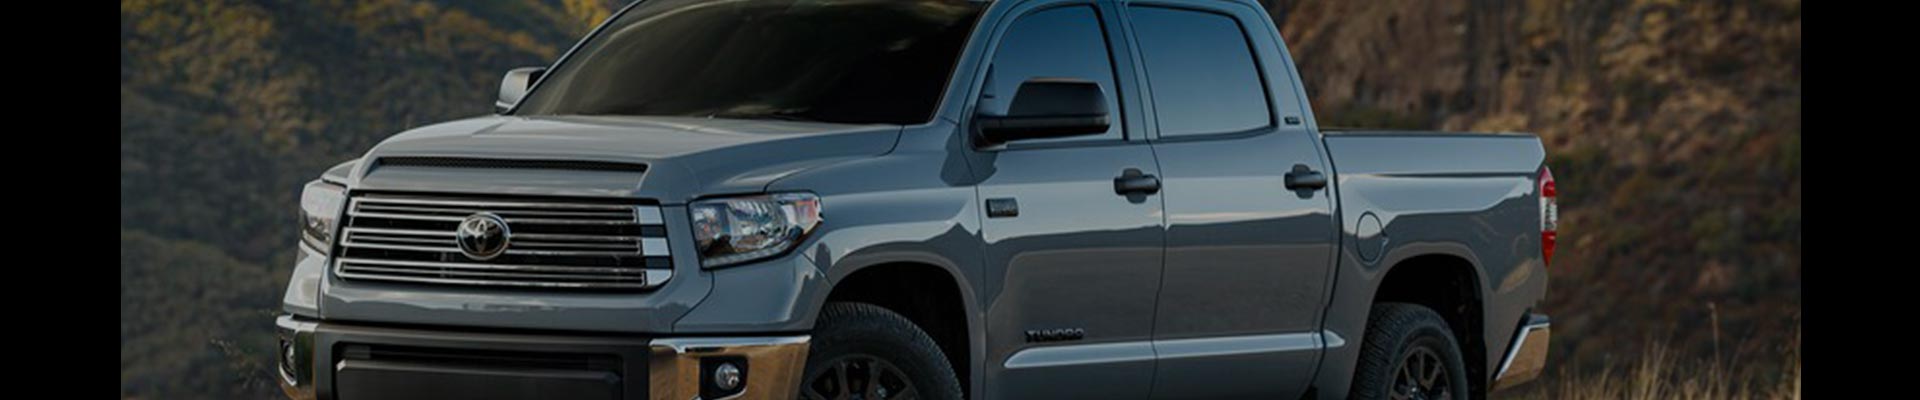 Shop Replacement and OEM 2006 Toyota Tundra Parts with Discounted Price on the Net